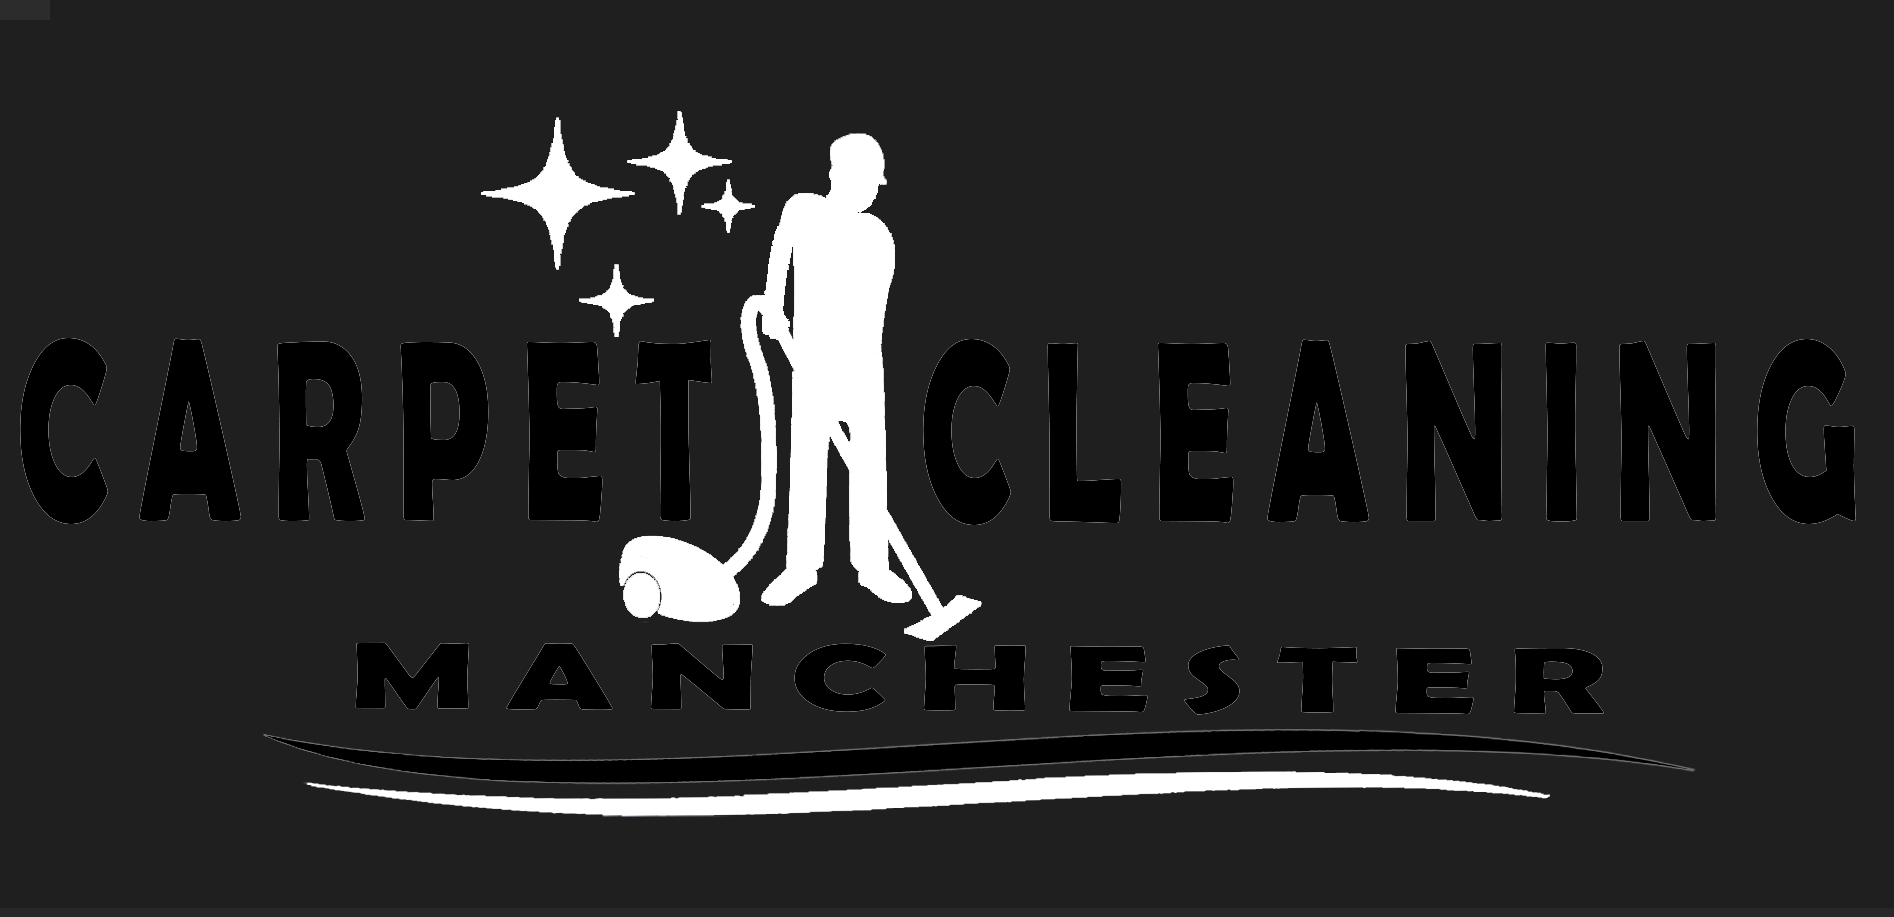 Carpet Cleaning Manchester